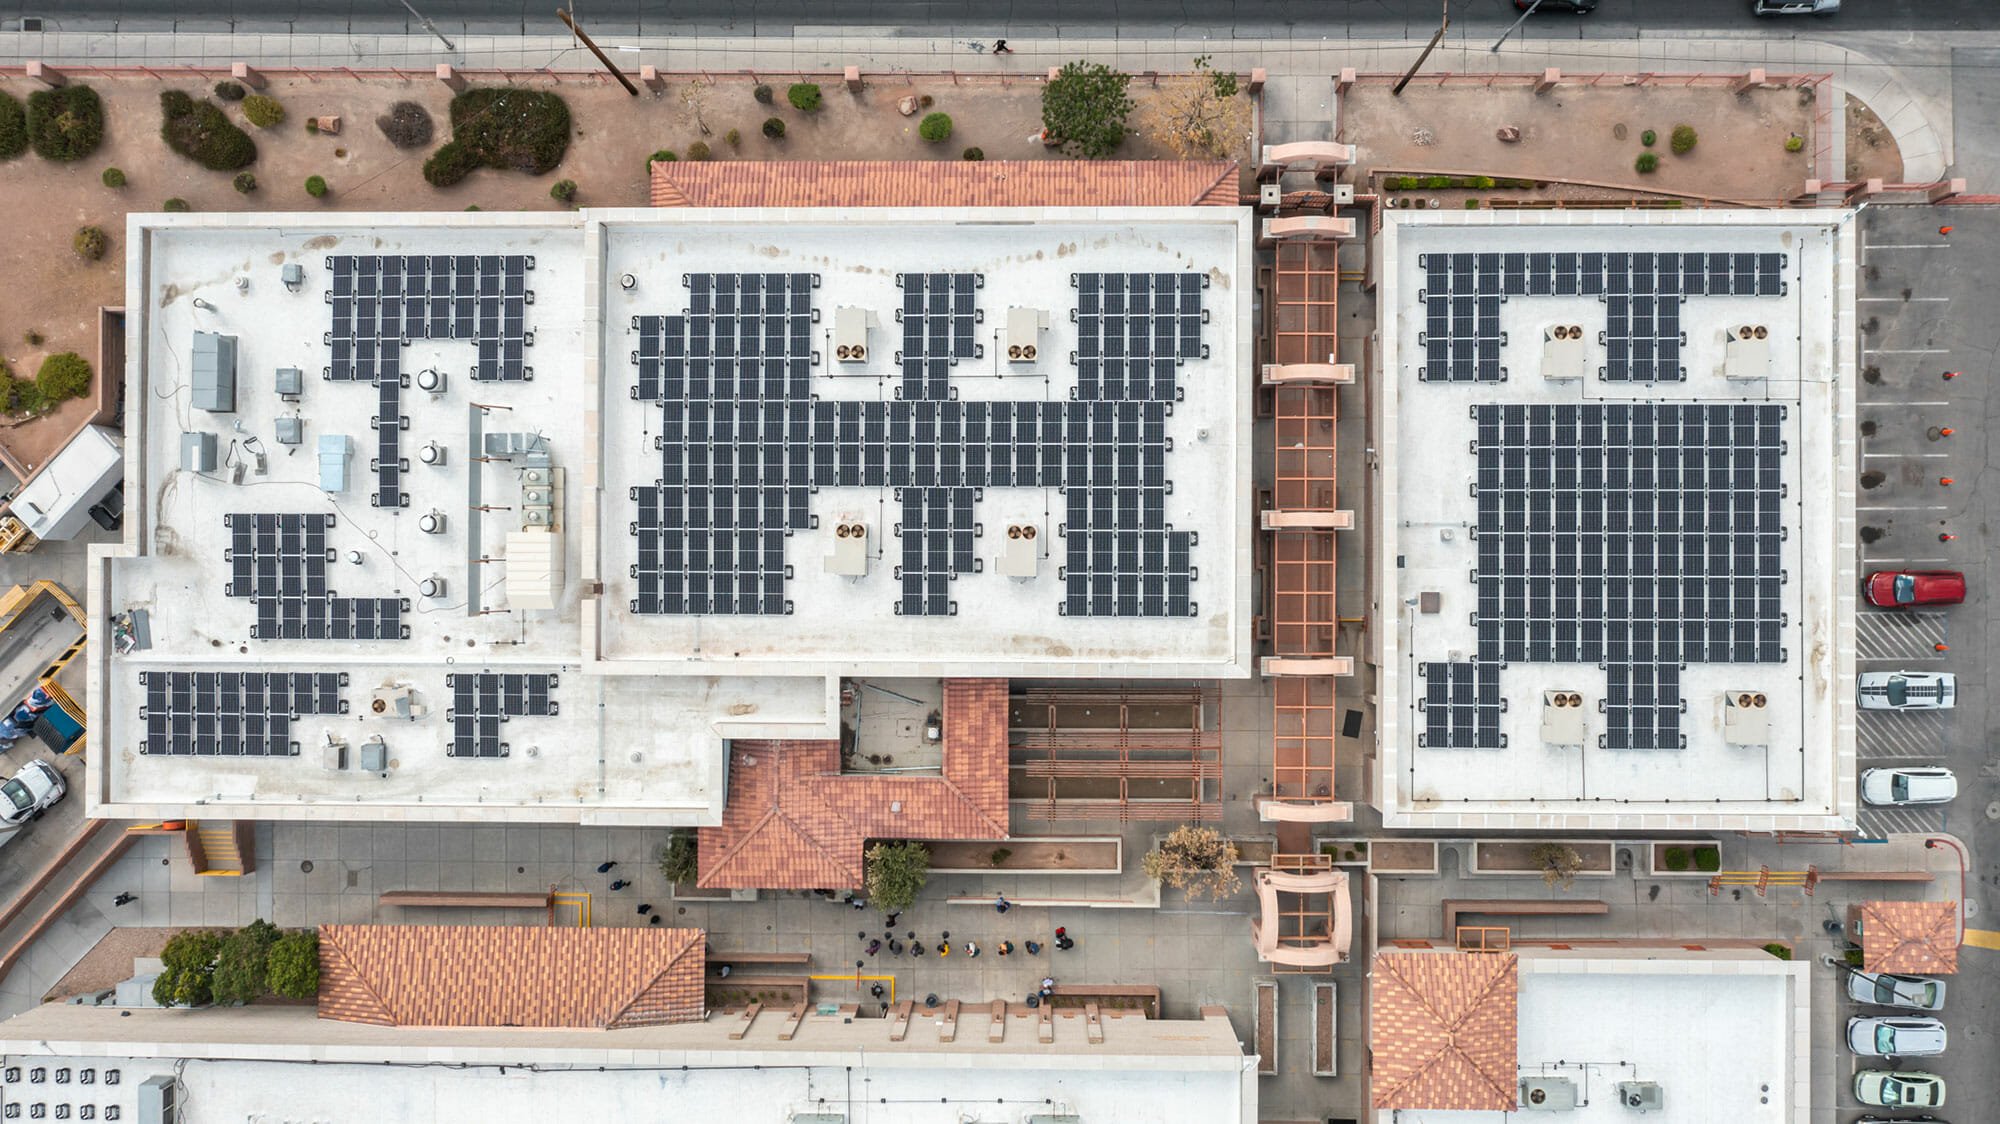 Aerial view of rooftop solar